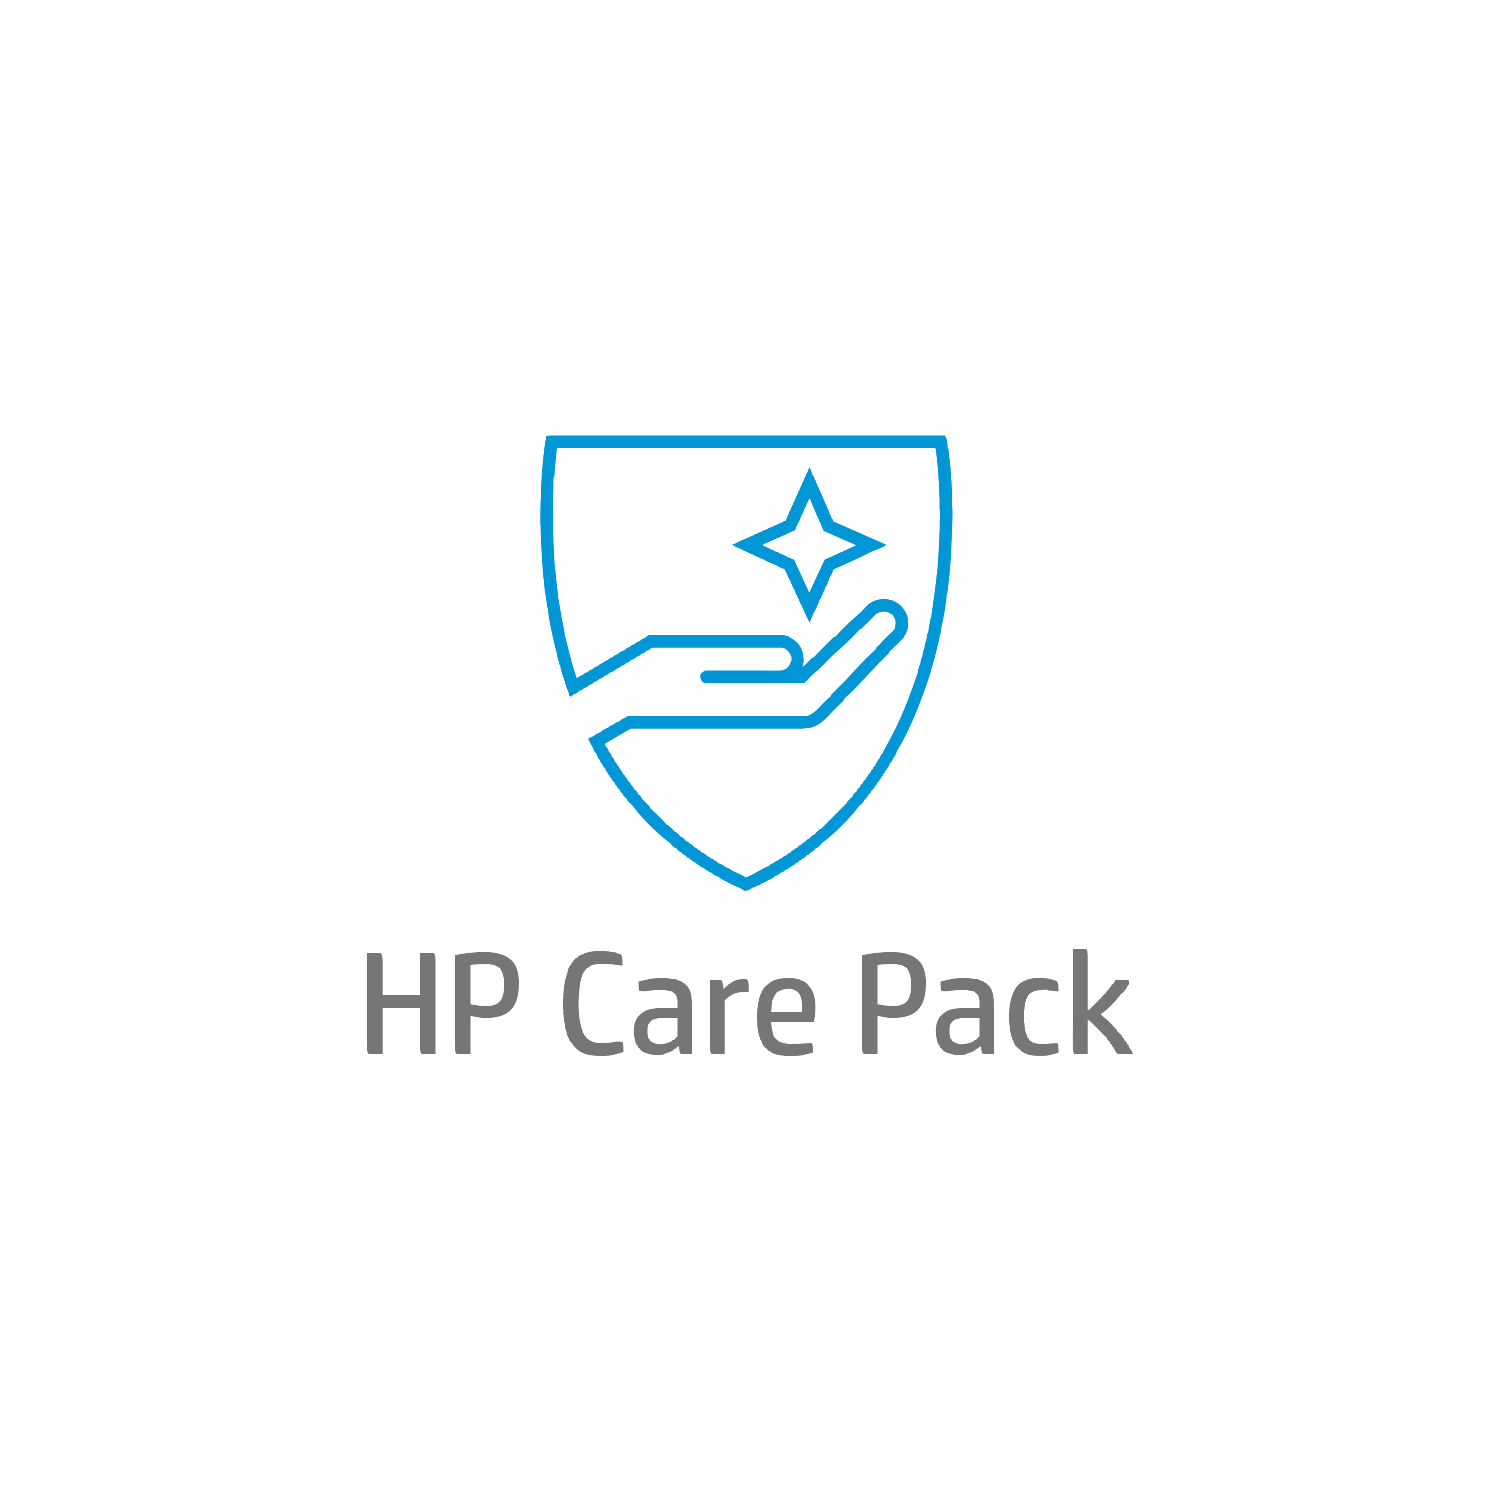 Bild von HP 1y 9x5 OutputCentral EI only 1-499 Lic SW Support REQUIRED for each sofware license purchased. - Remote software assistance - Remote - In warranty - Standard workdays - 9 hours - 1 year - Next available agent